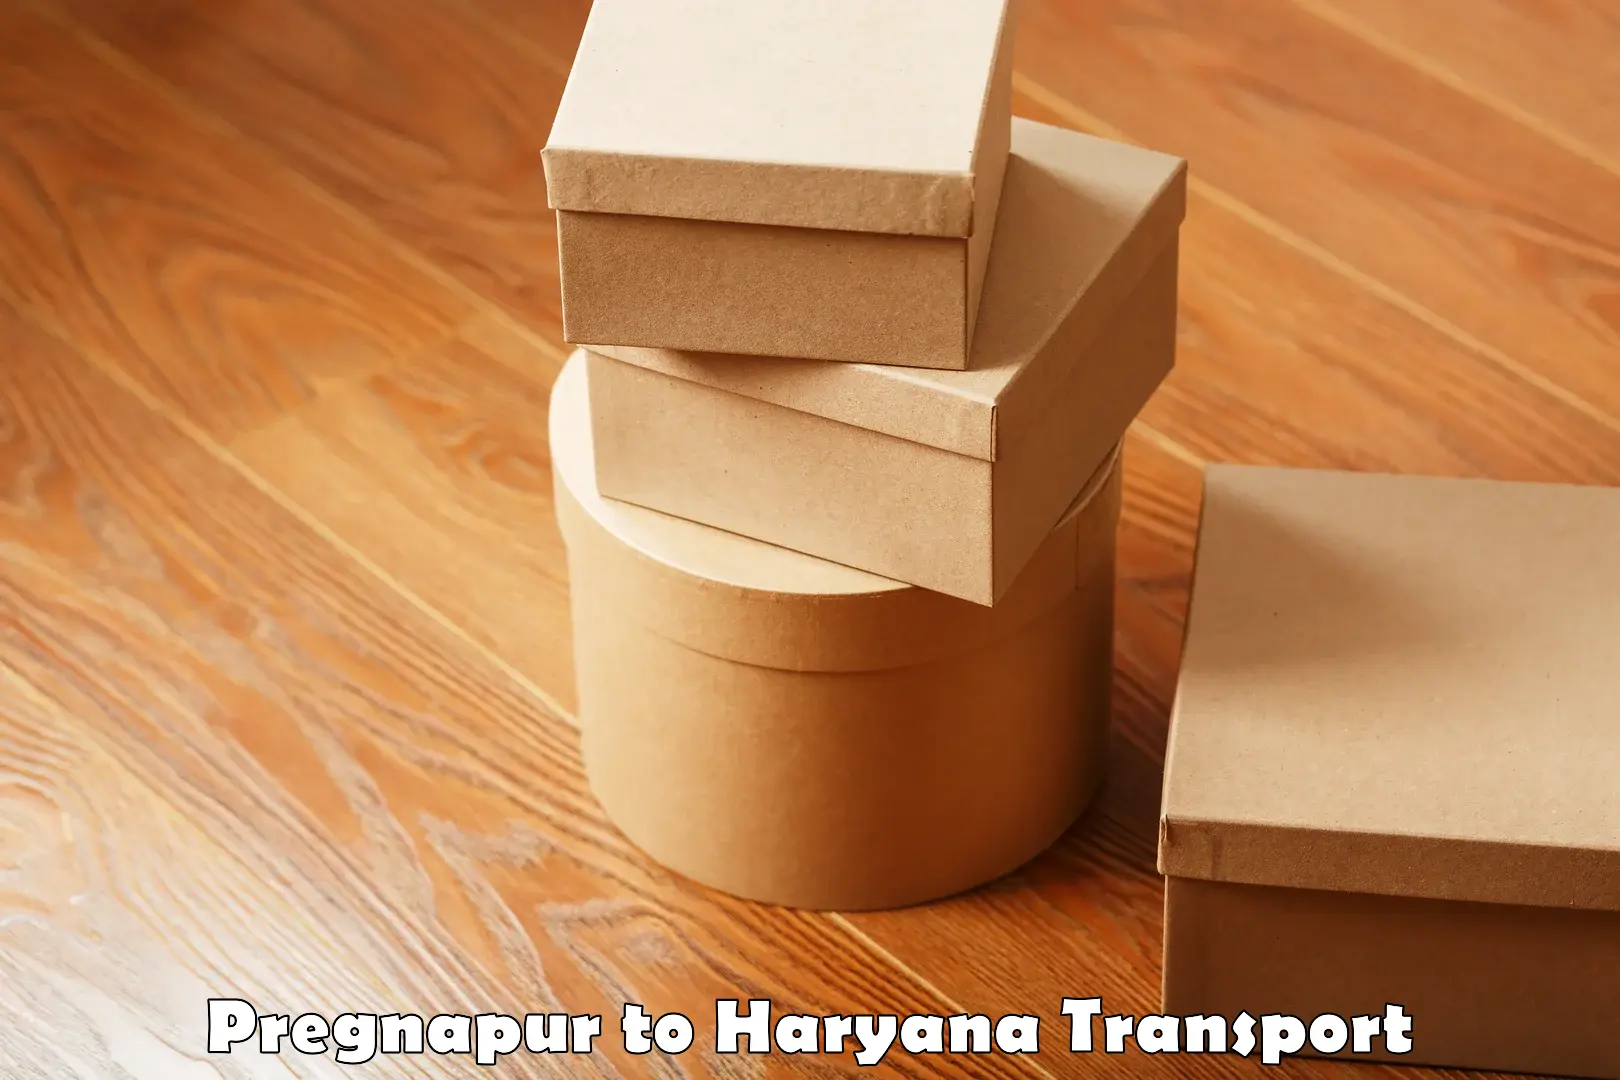 Commercial transport service Pregnapur to Haryana